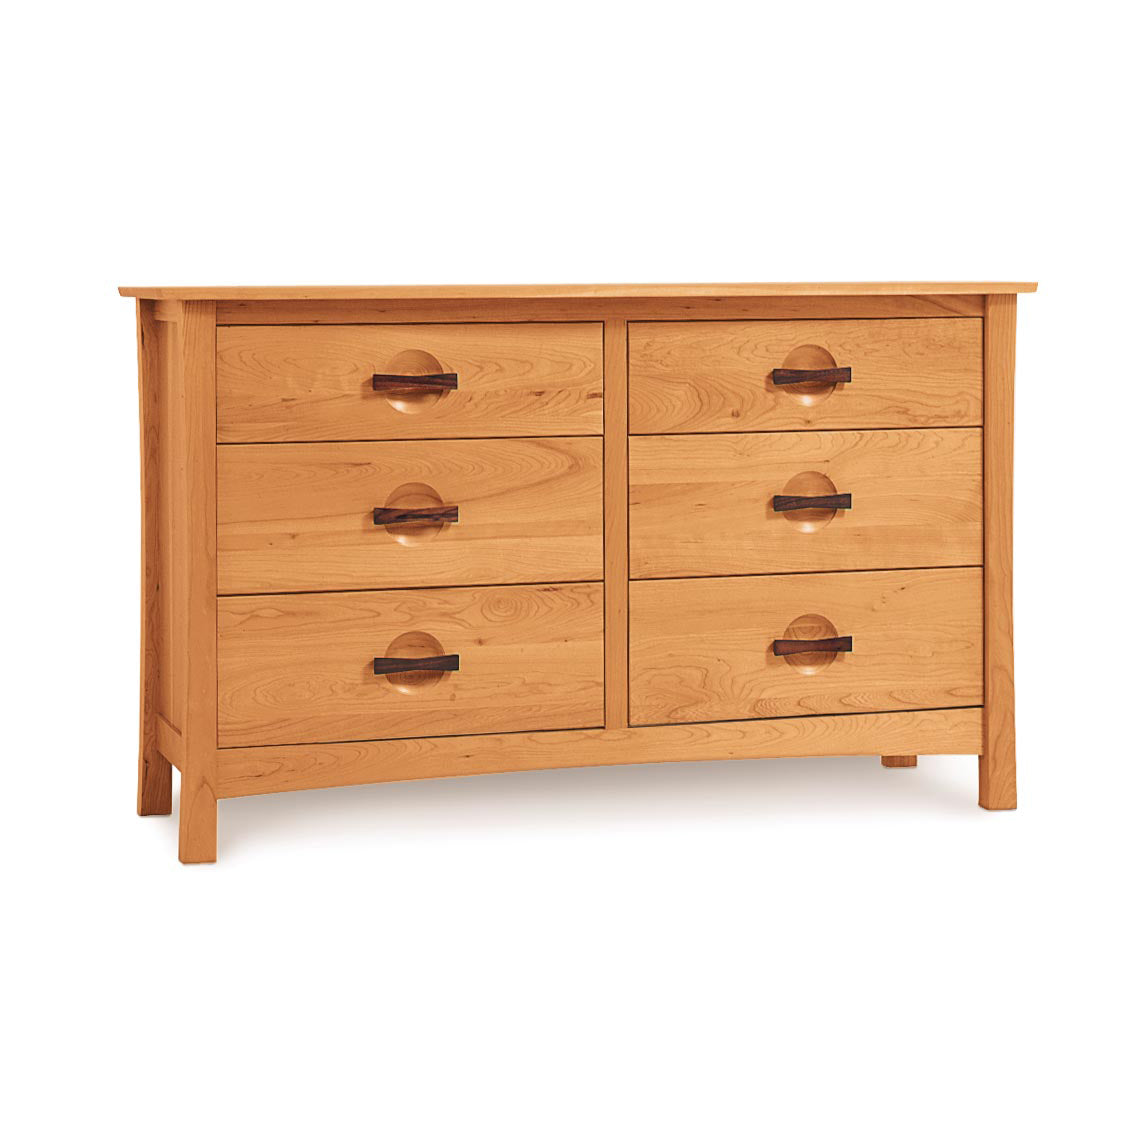 An image of a Berkeley 6-Drawer Dresser in the American Craftsman style, made by Copeland Furniture.